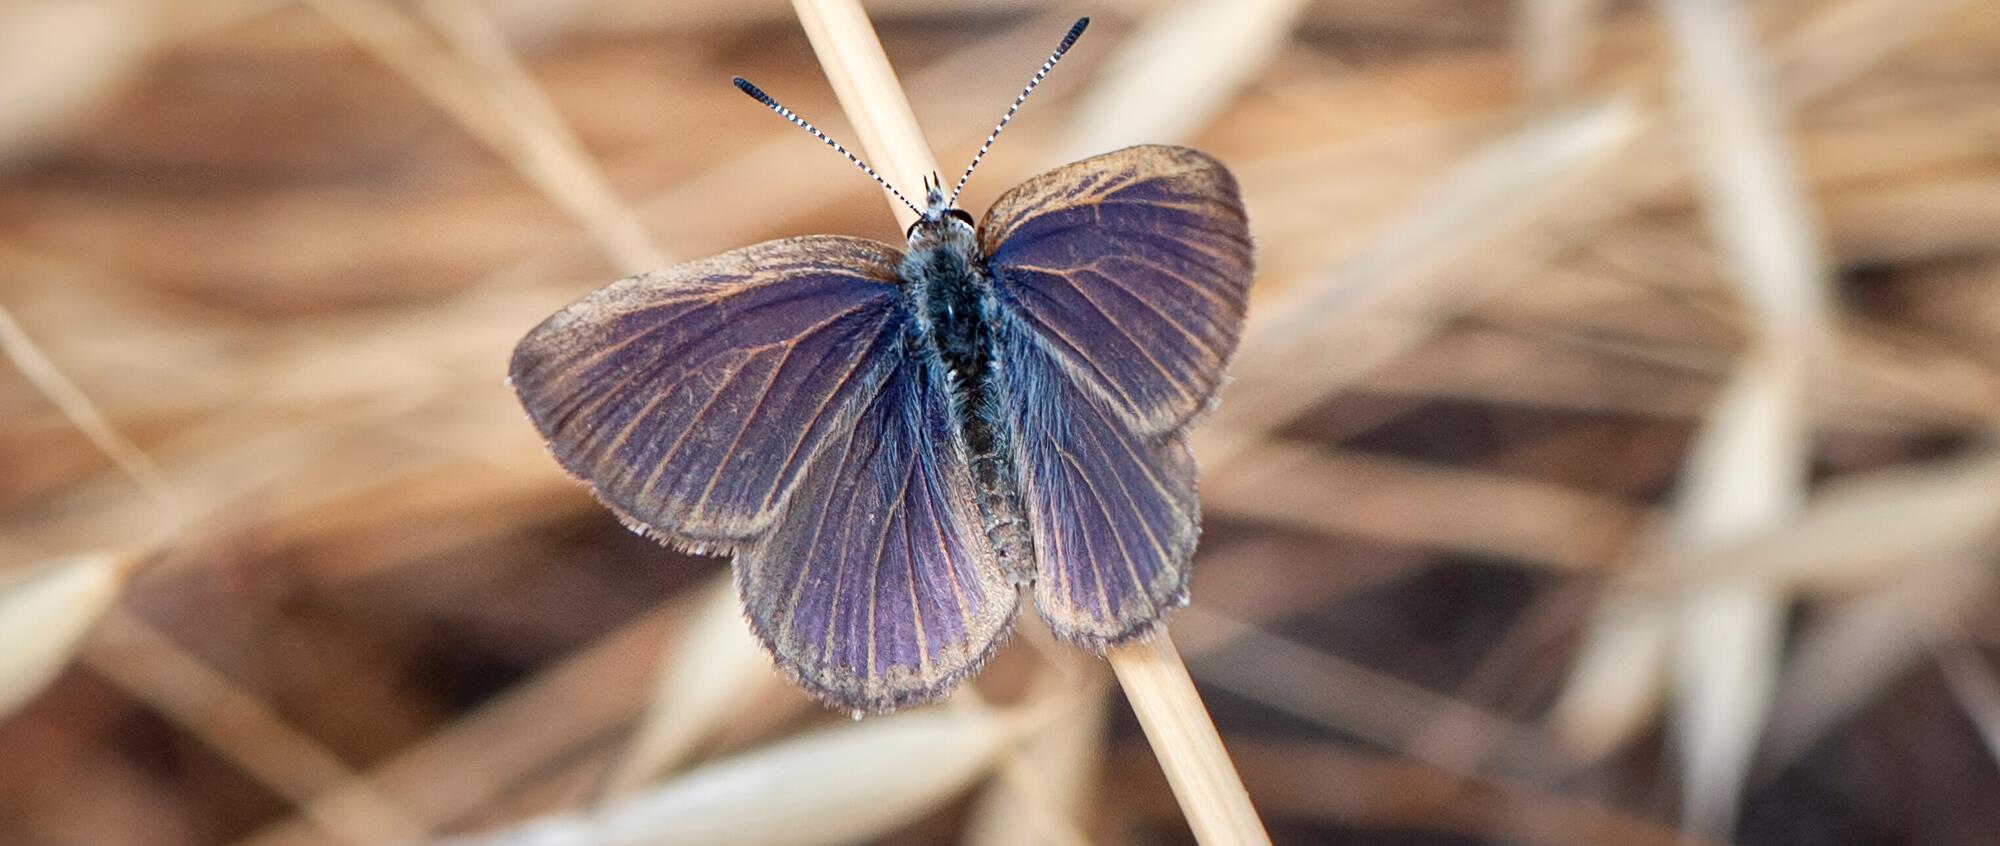 A Golden-rayed Blue Butterfly (a grey, brown butterfly with blue wings) sitting on a piece of dry grass.